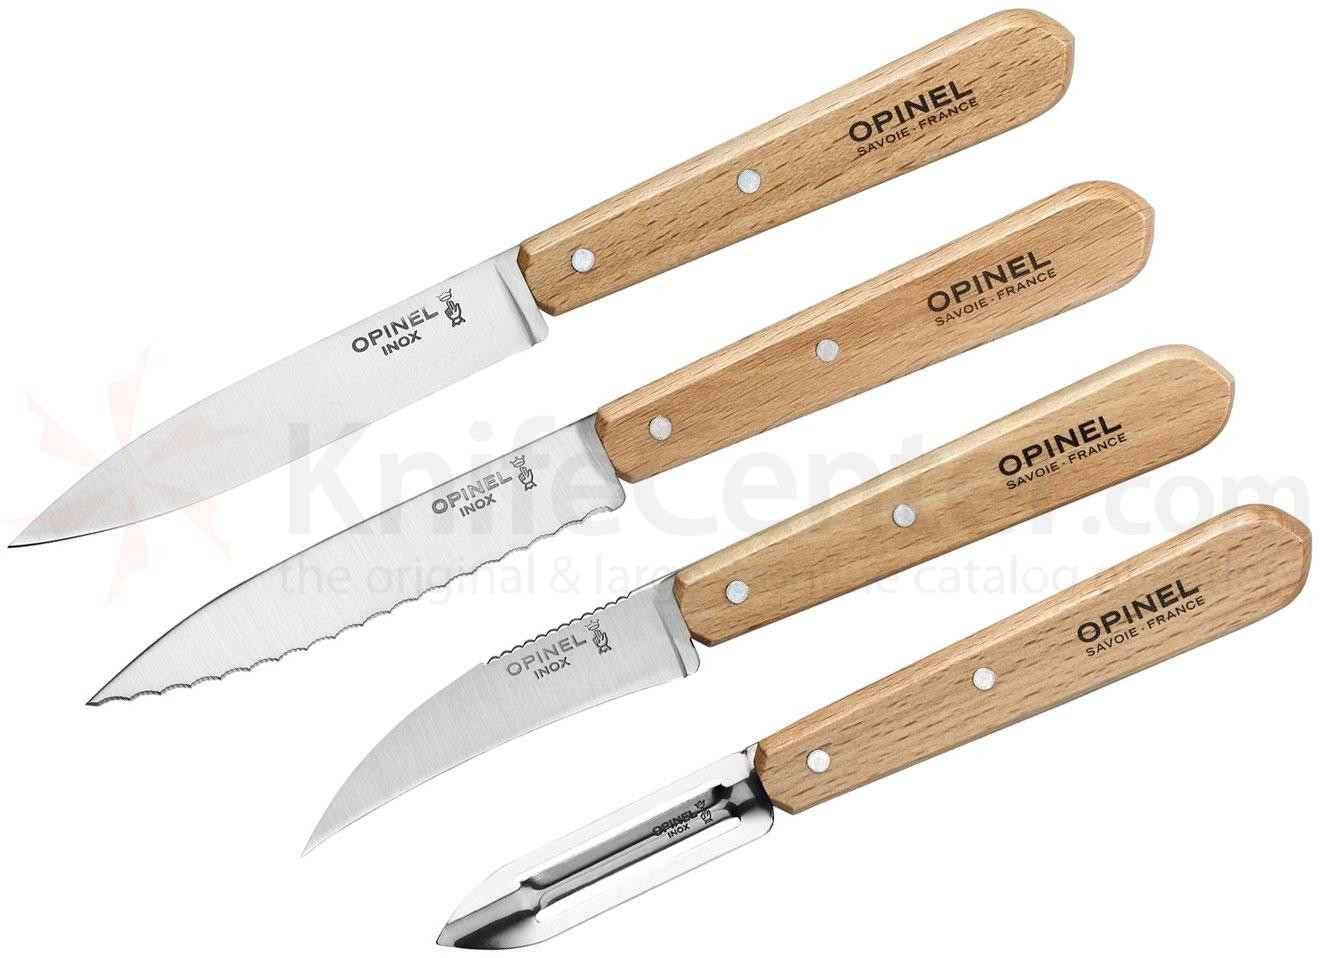 Small Kitchen Knife
 Opinel 4 Piece Essentials Small Kitchen Knives Set